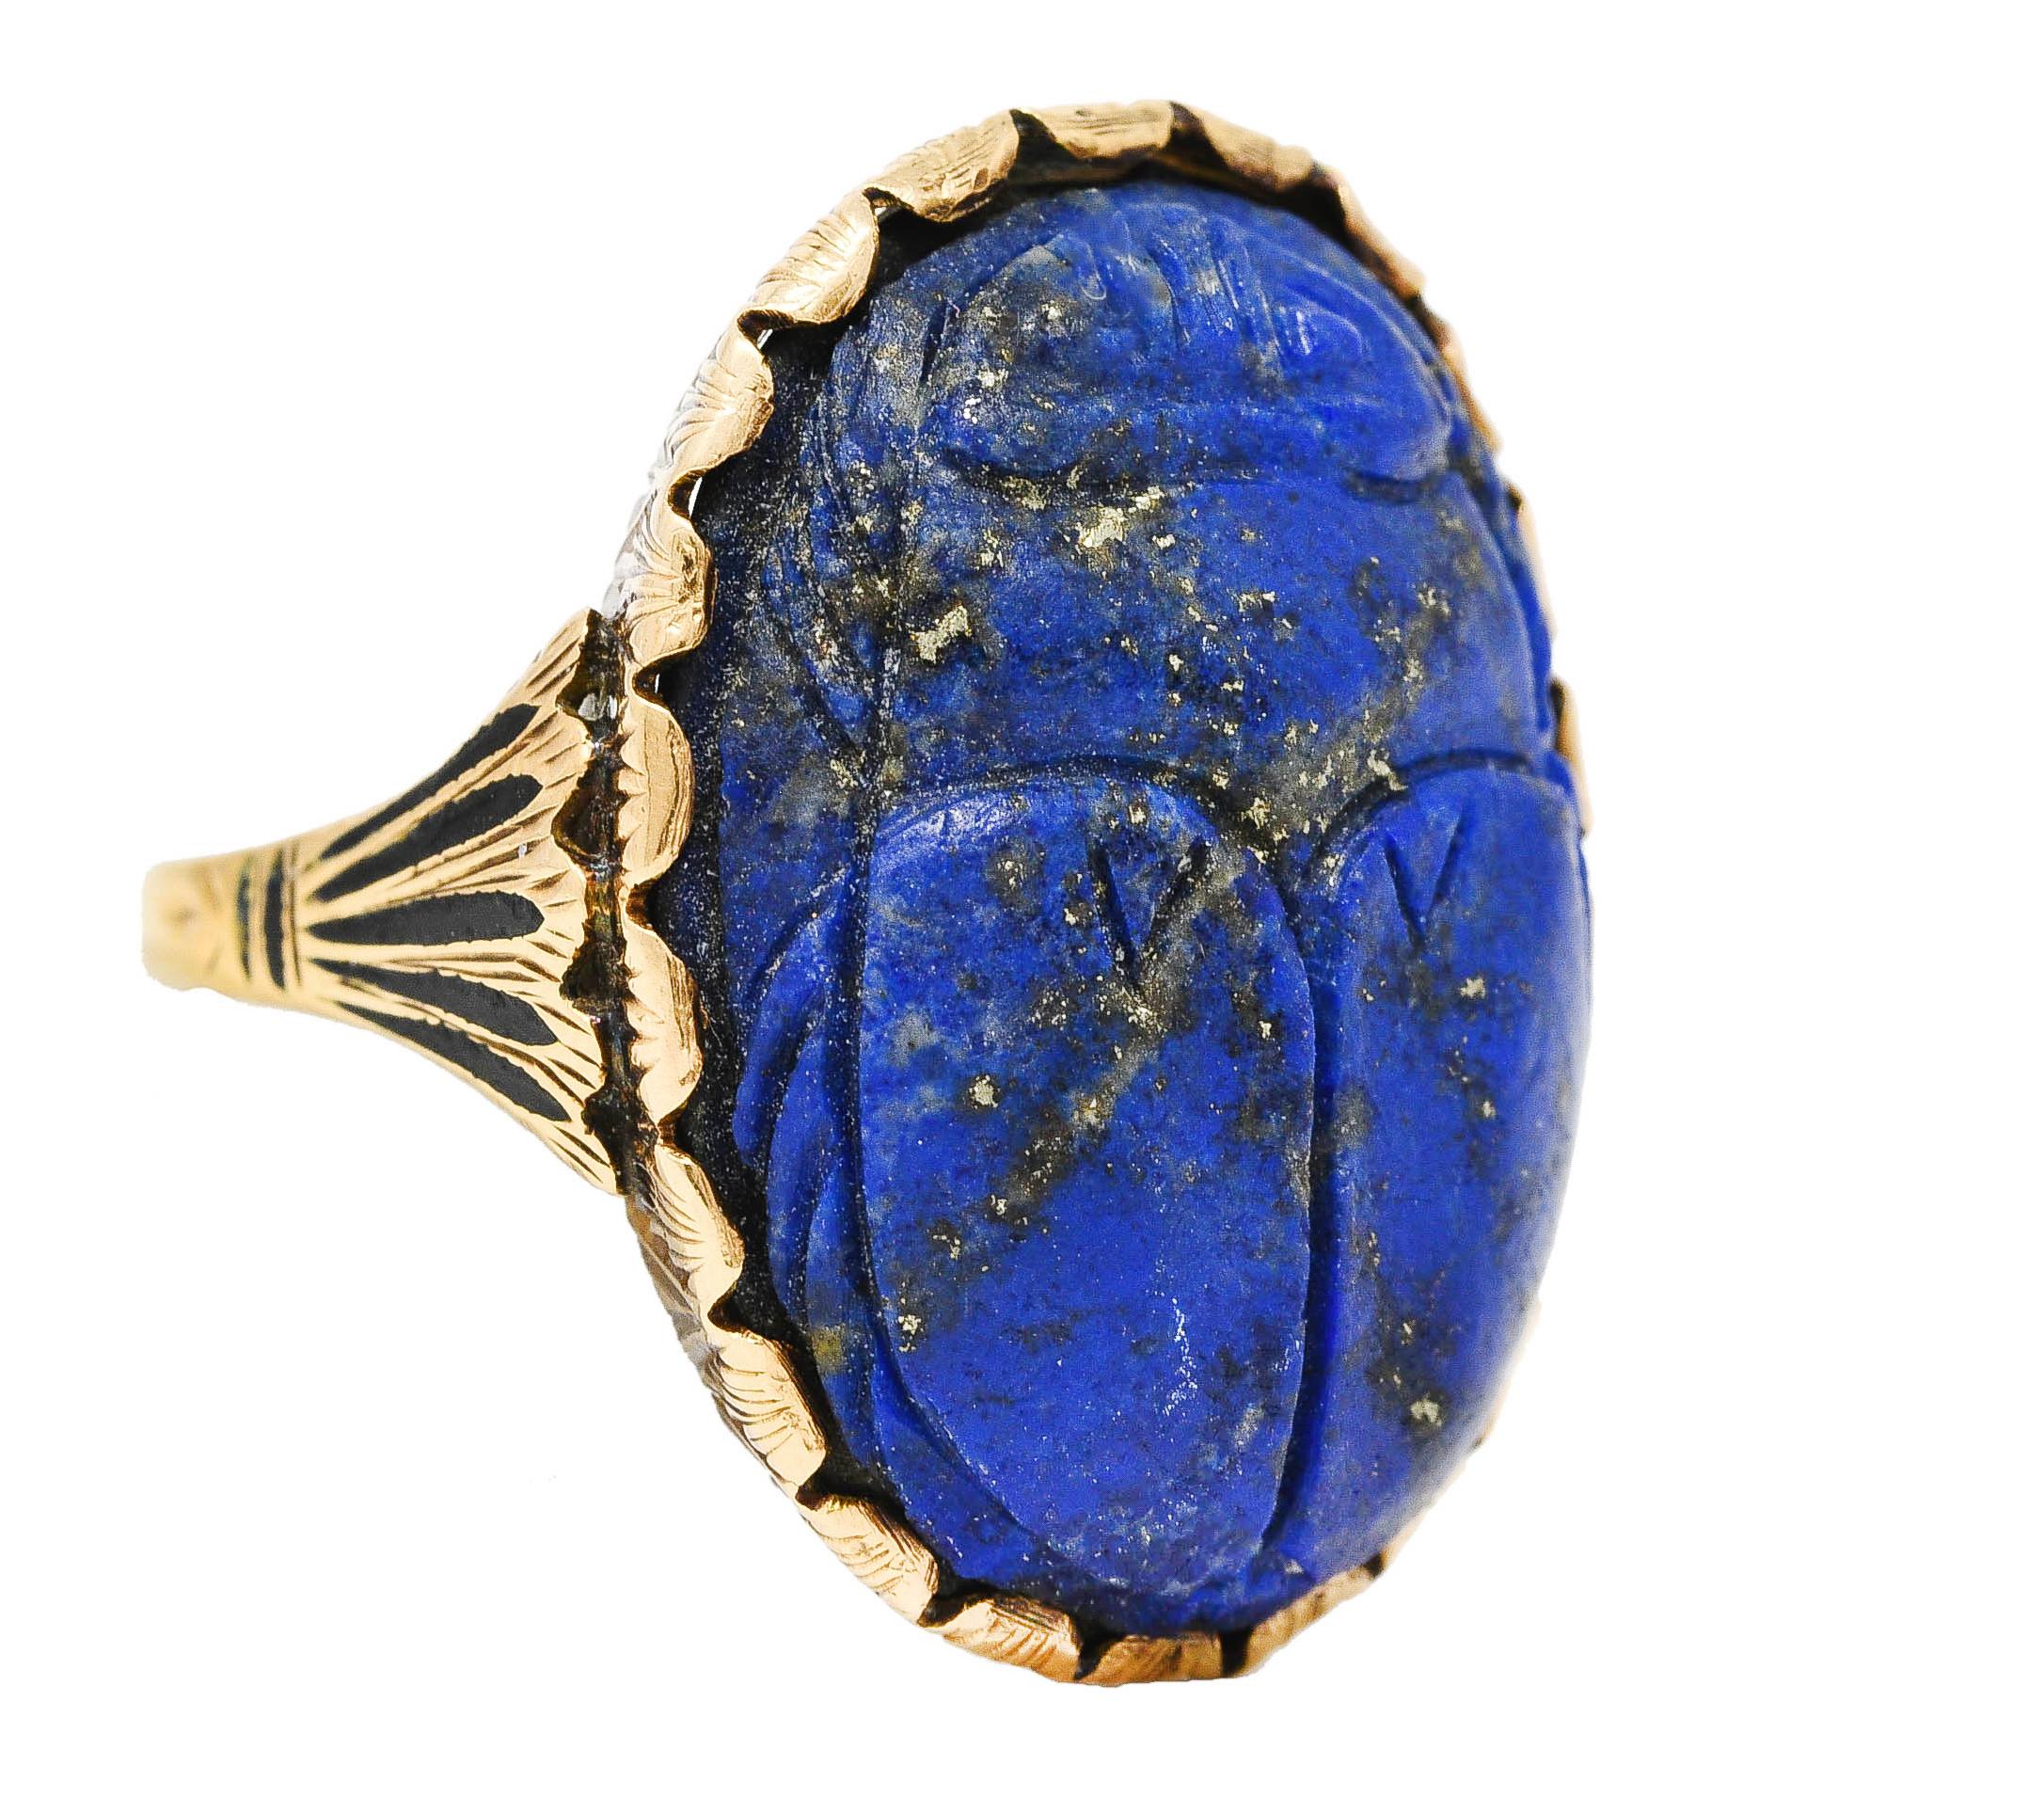 Centering a 17.0 x 22.0 mm oval lapis lazuli cabochon - carved to depict a scarab beetle. Opaque ultramarine blue with pyrite flecking - set in a stylized scalloped bezel. With foliate engraved basket fully around. With grooved fanning shoulders.